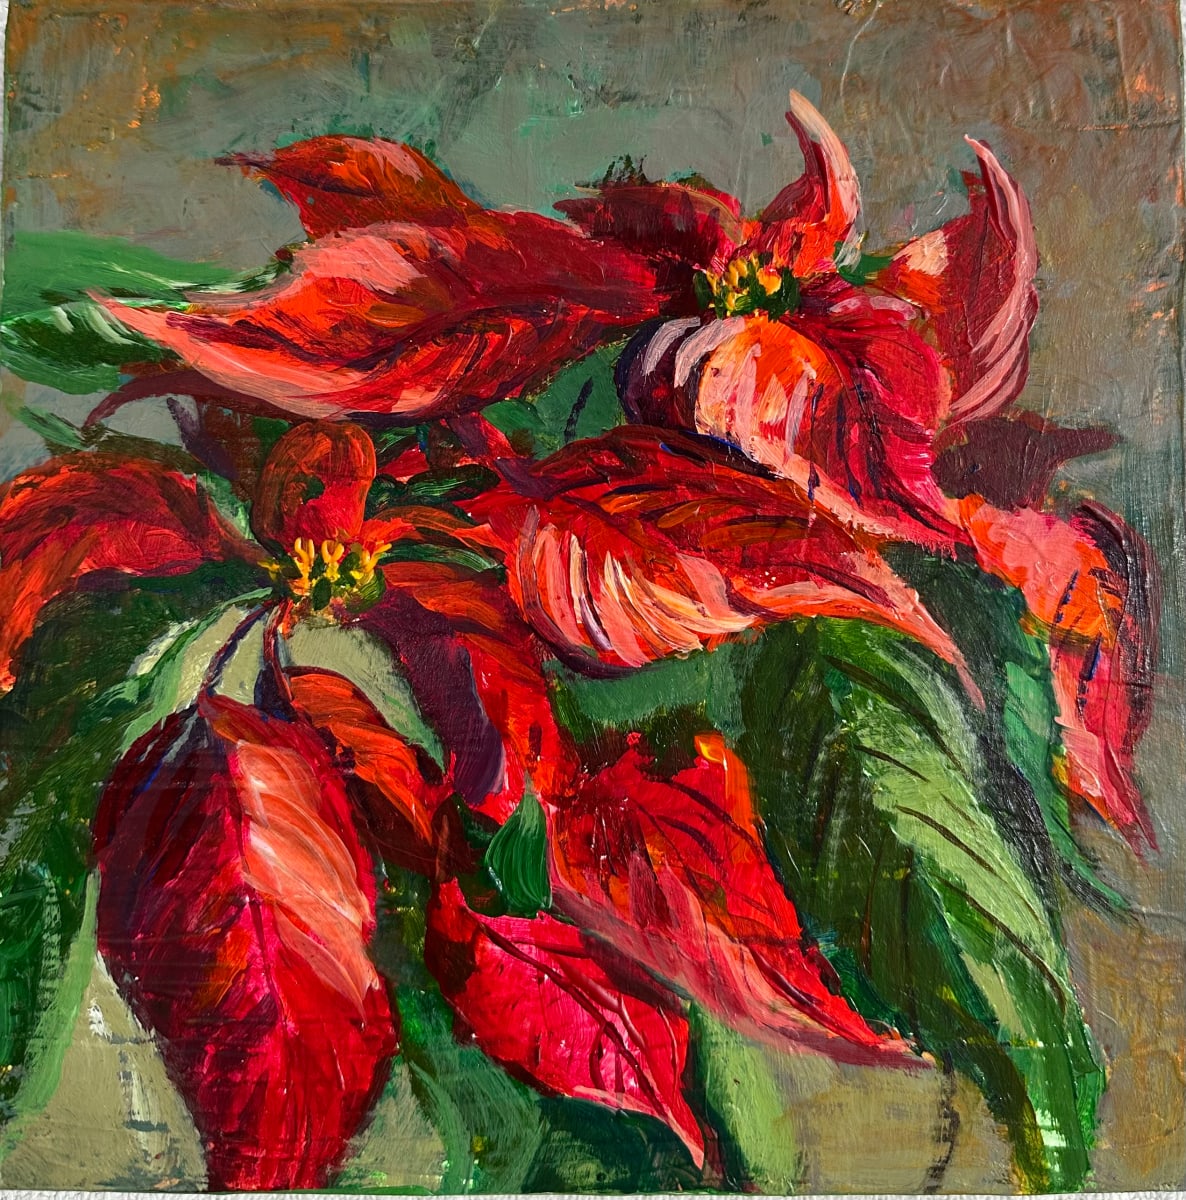 Poinsettia by susan tyler  Image: I love these ever-present Christmas flowers. 